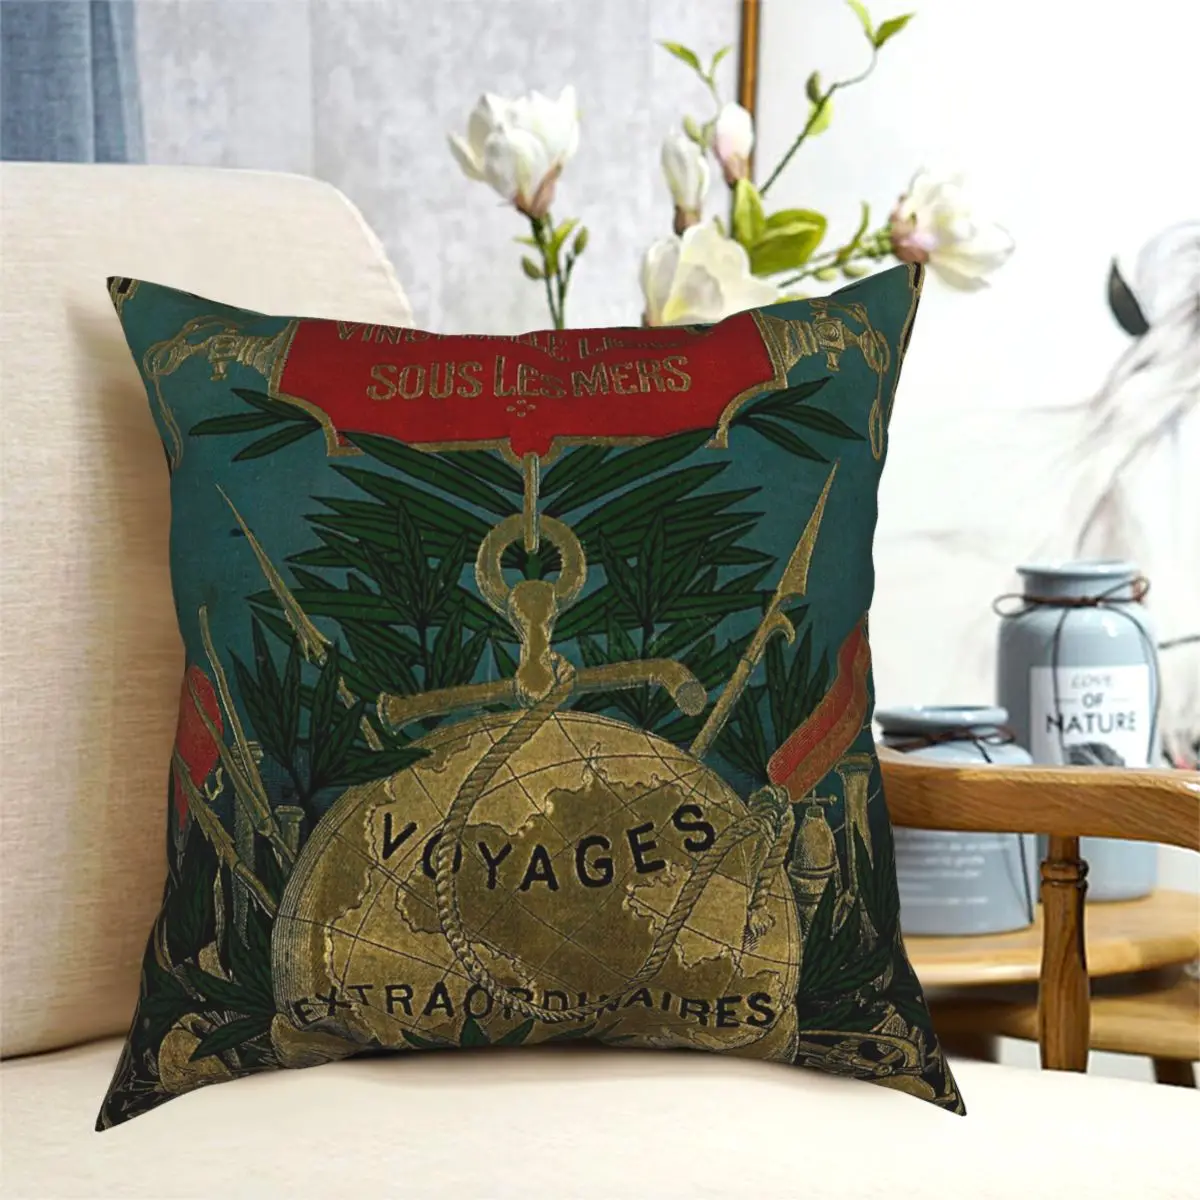 

Jules Verne Extraordinary Voyages Square Pillowcase Polyester Zip Decorative Throw Pillow Case Home Cushion Cover Wholesale 18